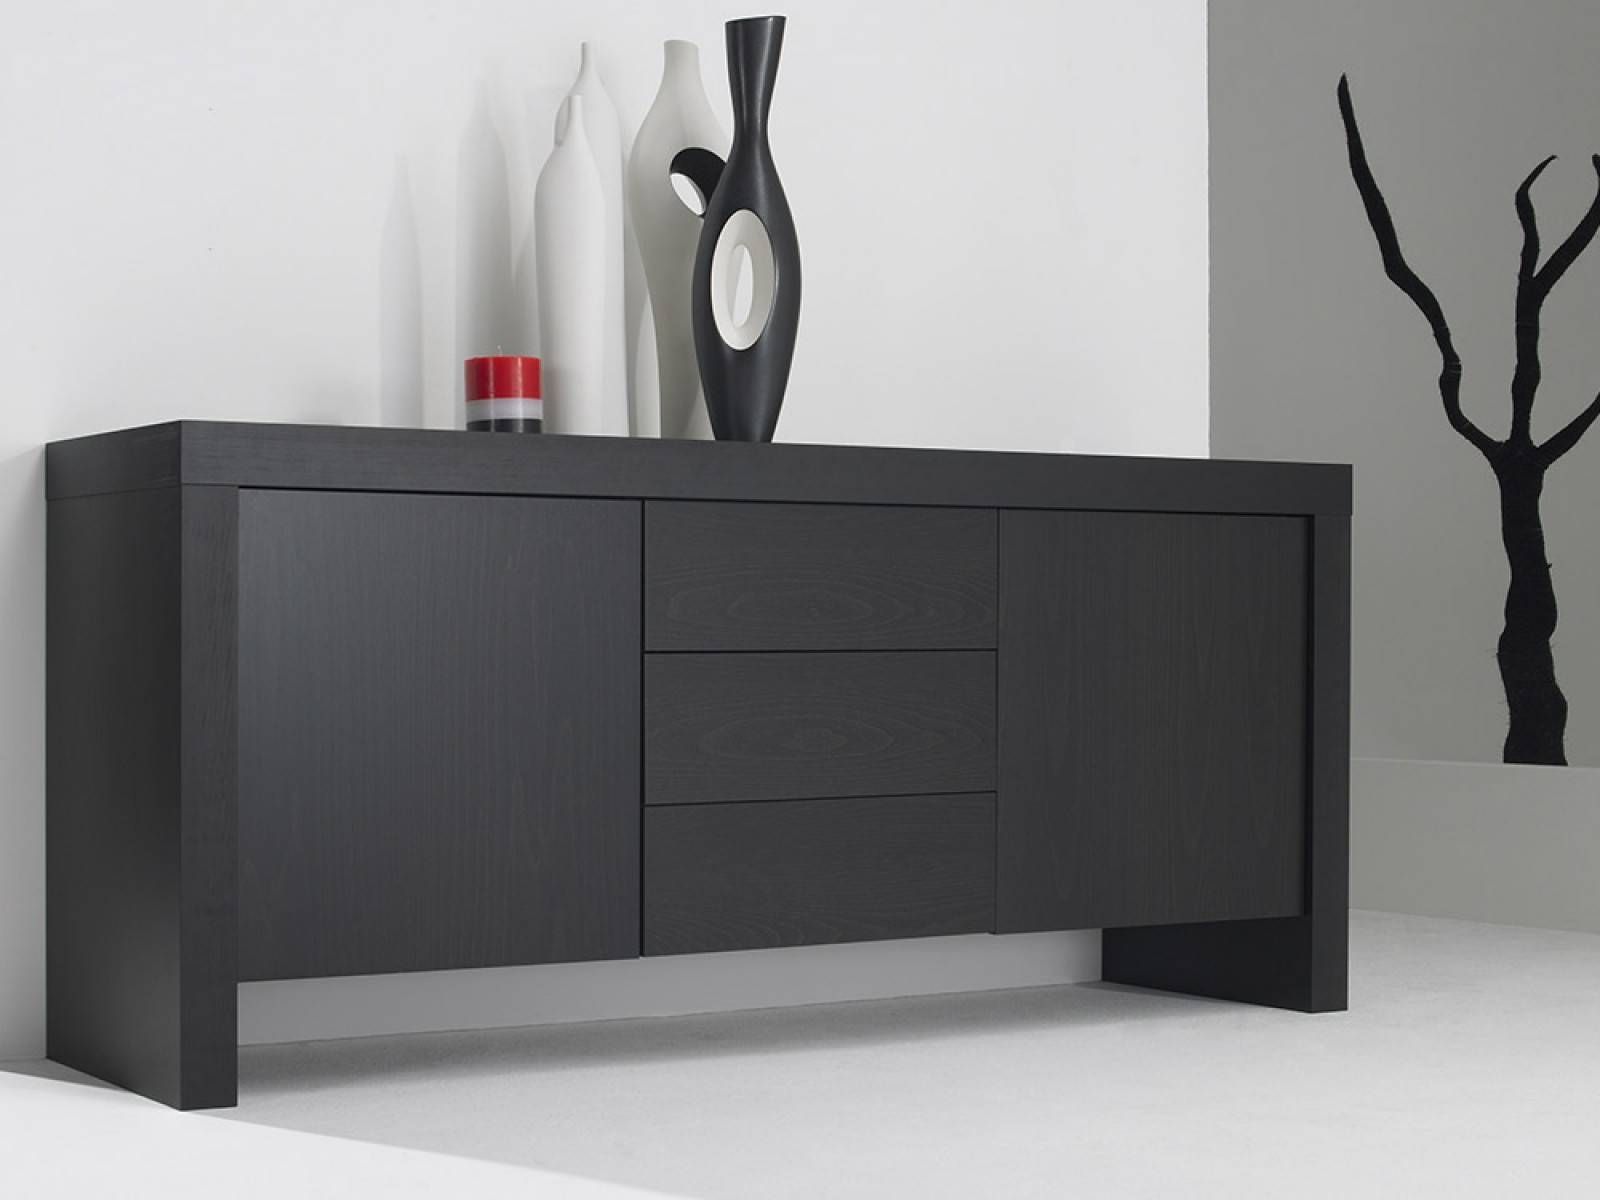 Tremendous Modern Dark Grey Sideboard Design With Two Cabinet Intended For Grey Sideboards (View 21 of 30)